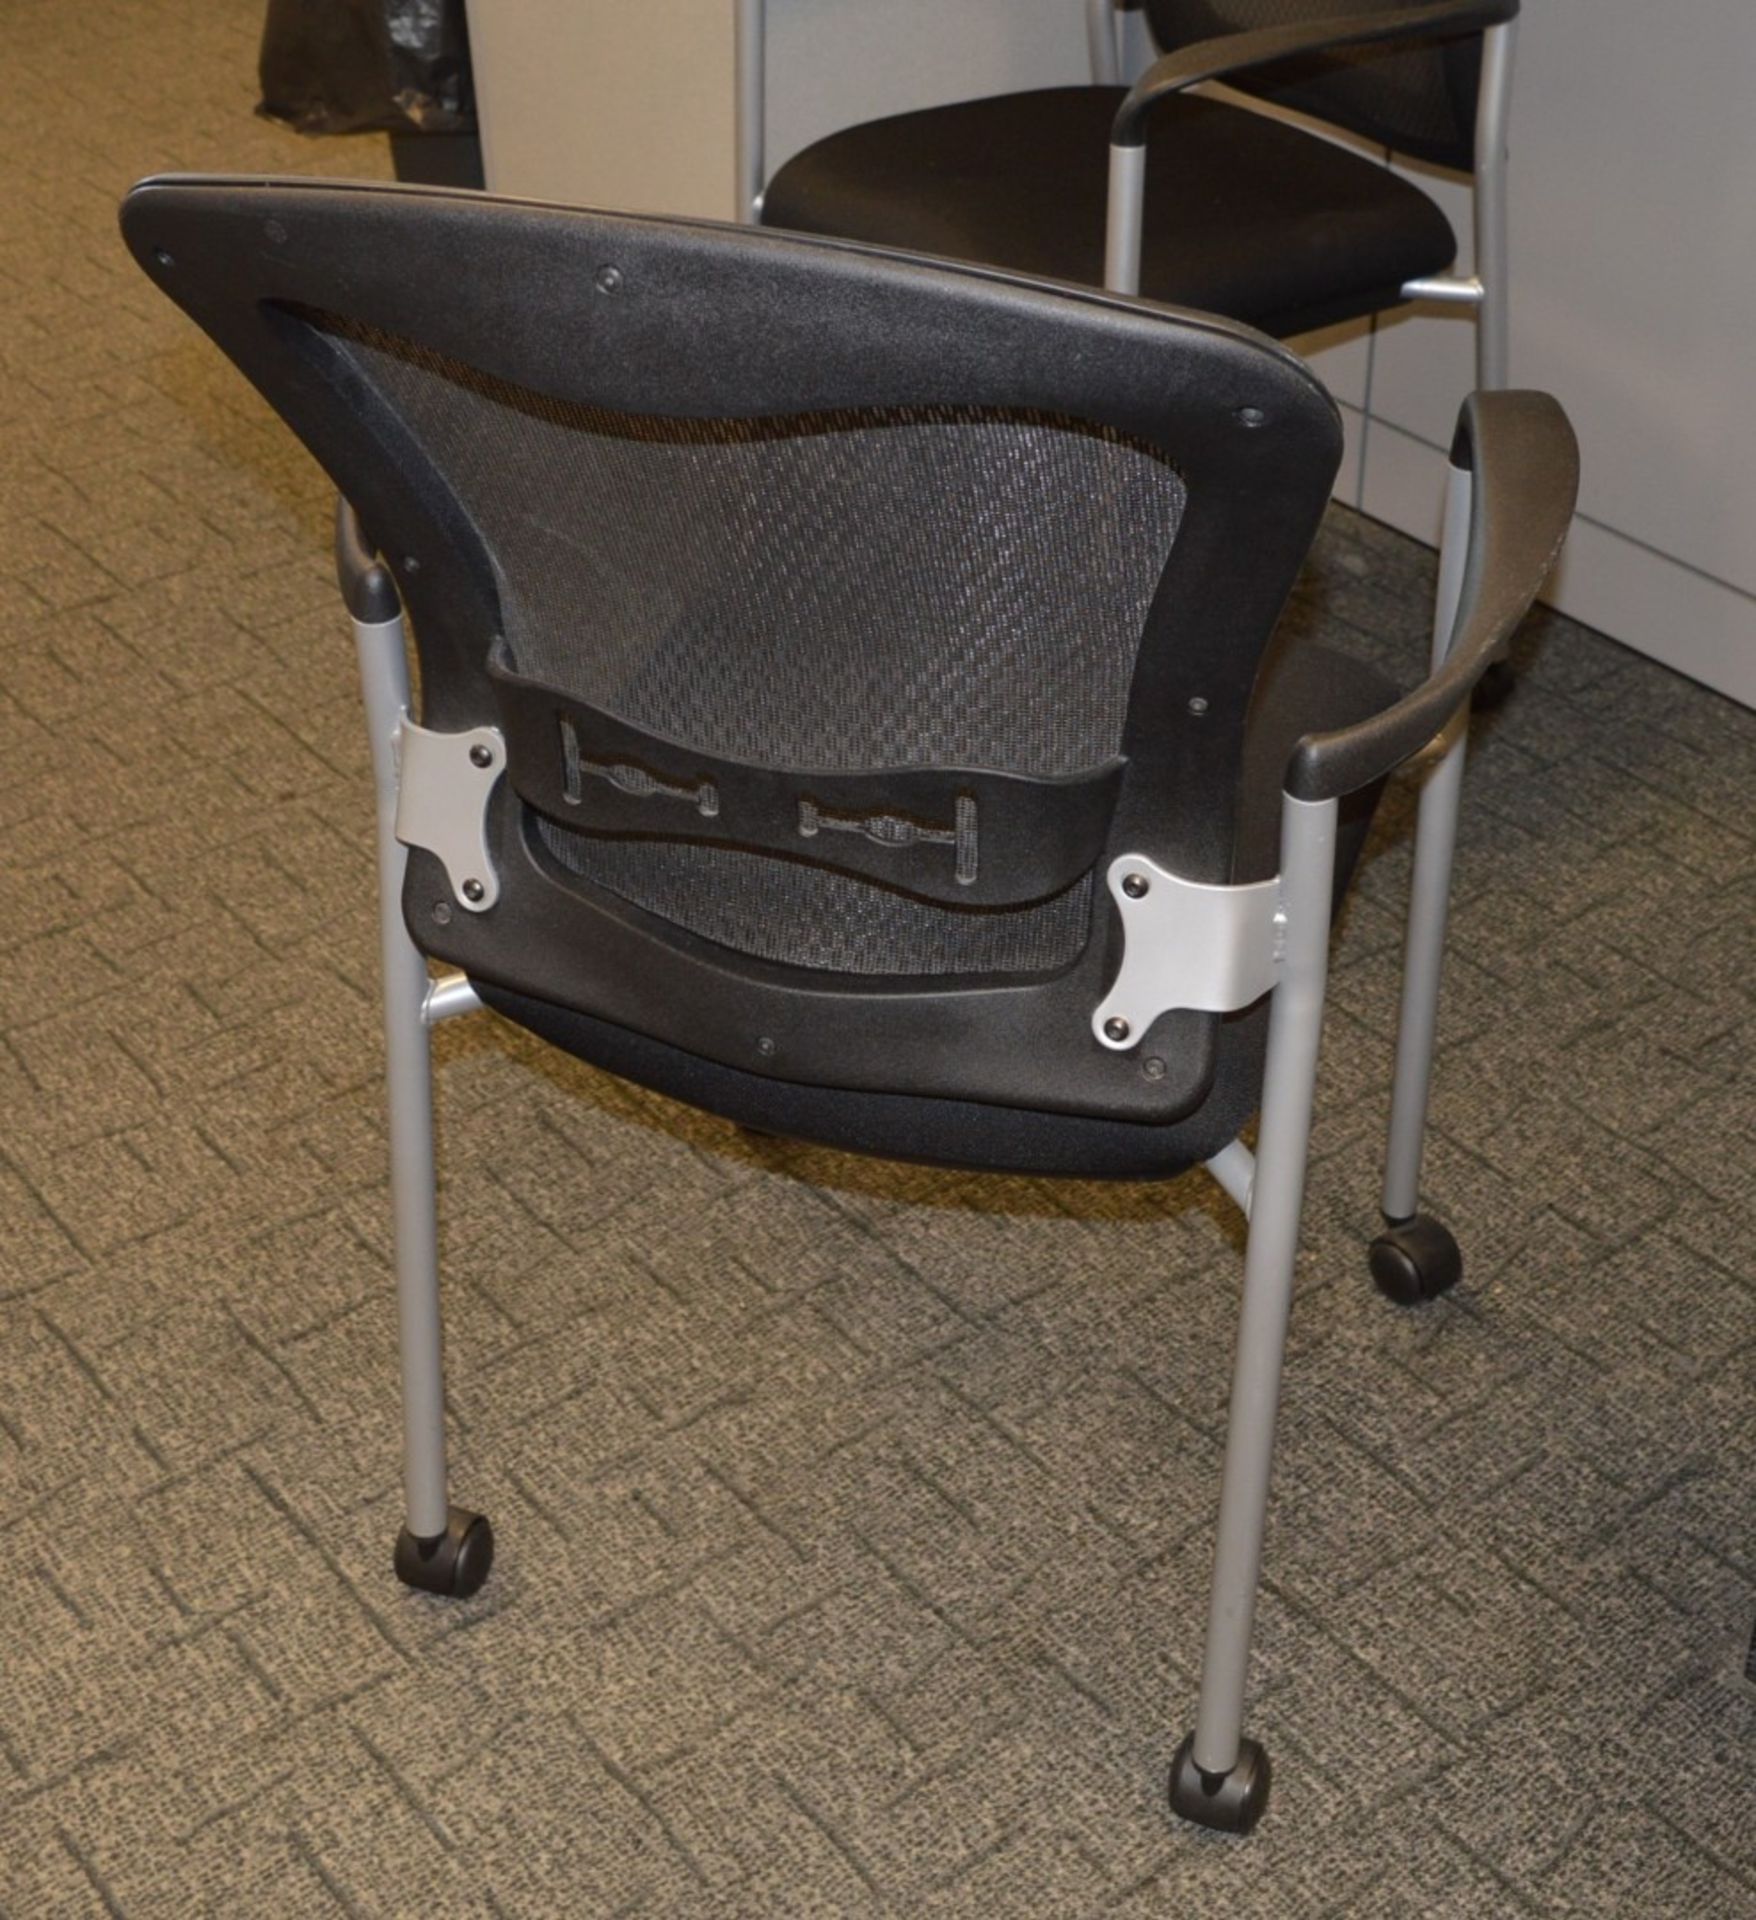 4 x Senator SL829A Office Chairs With Castors - Ergonomical Chairs With Armrests - High Quality - Image 4 of 5